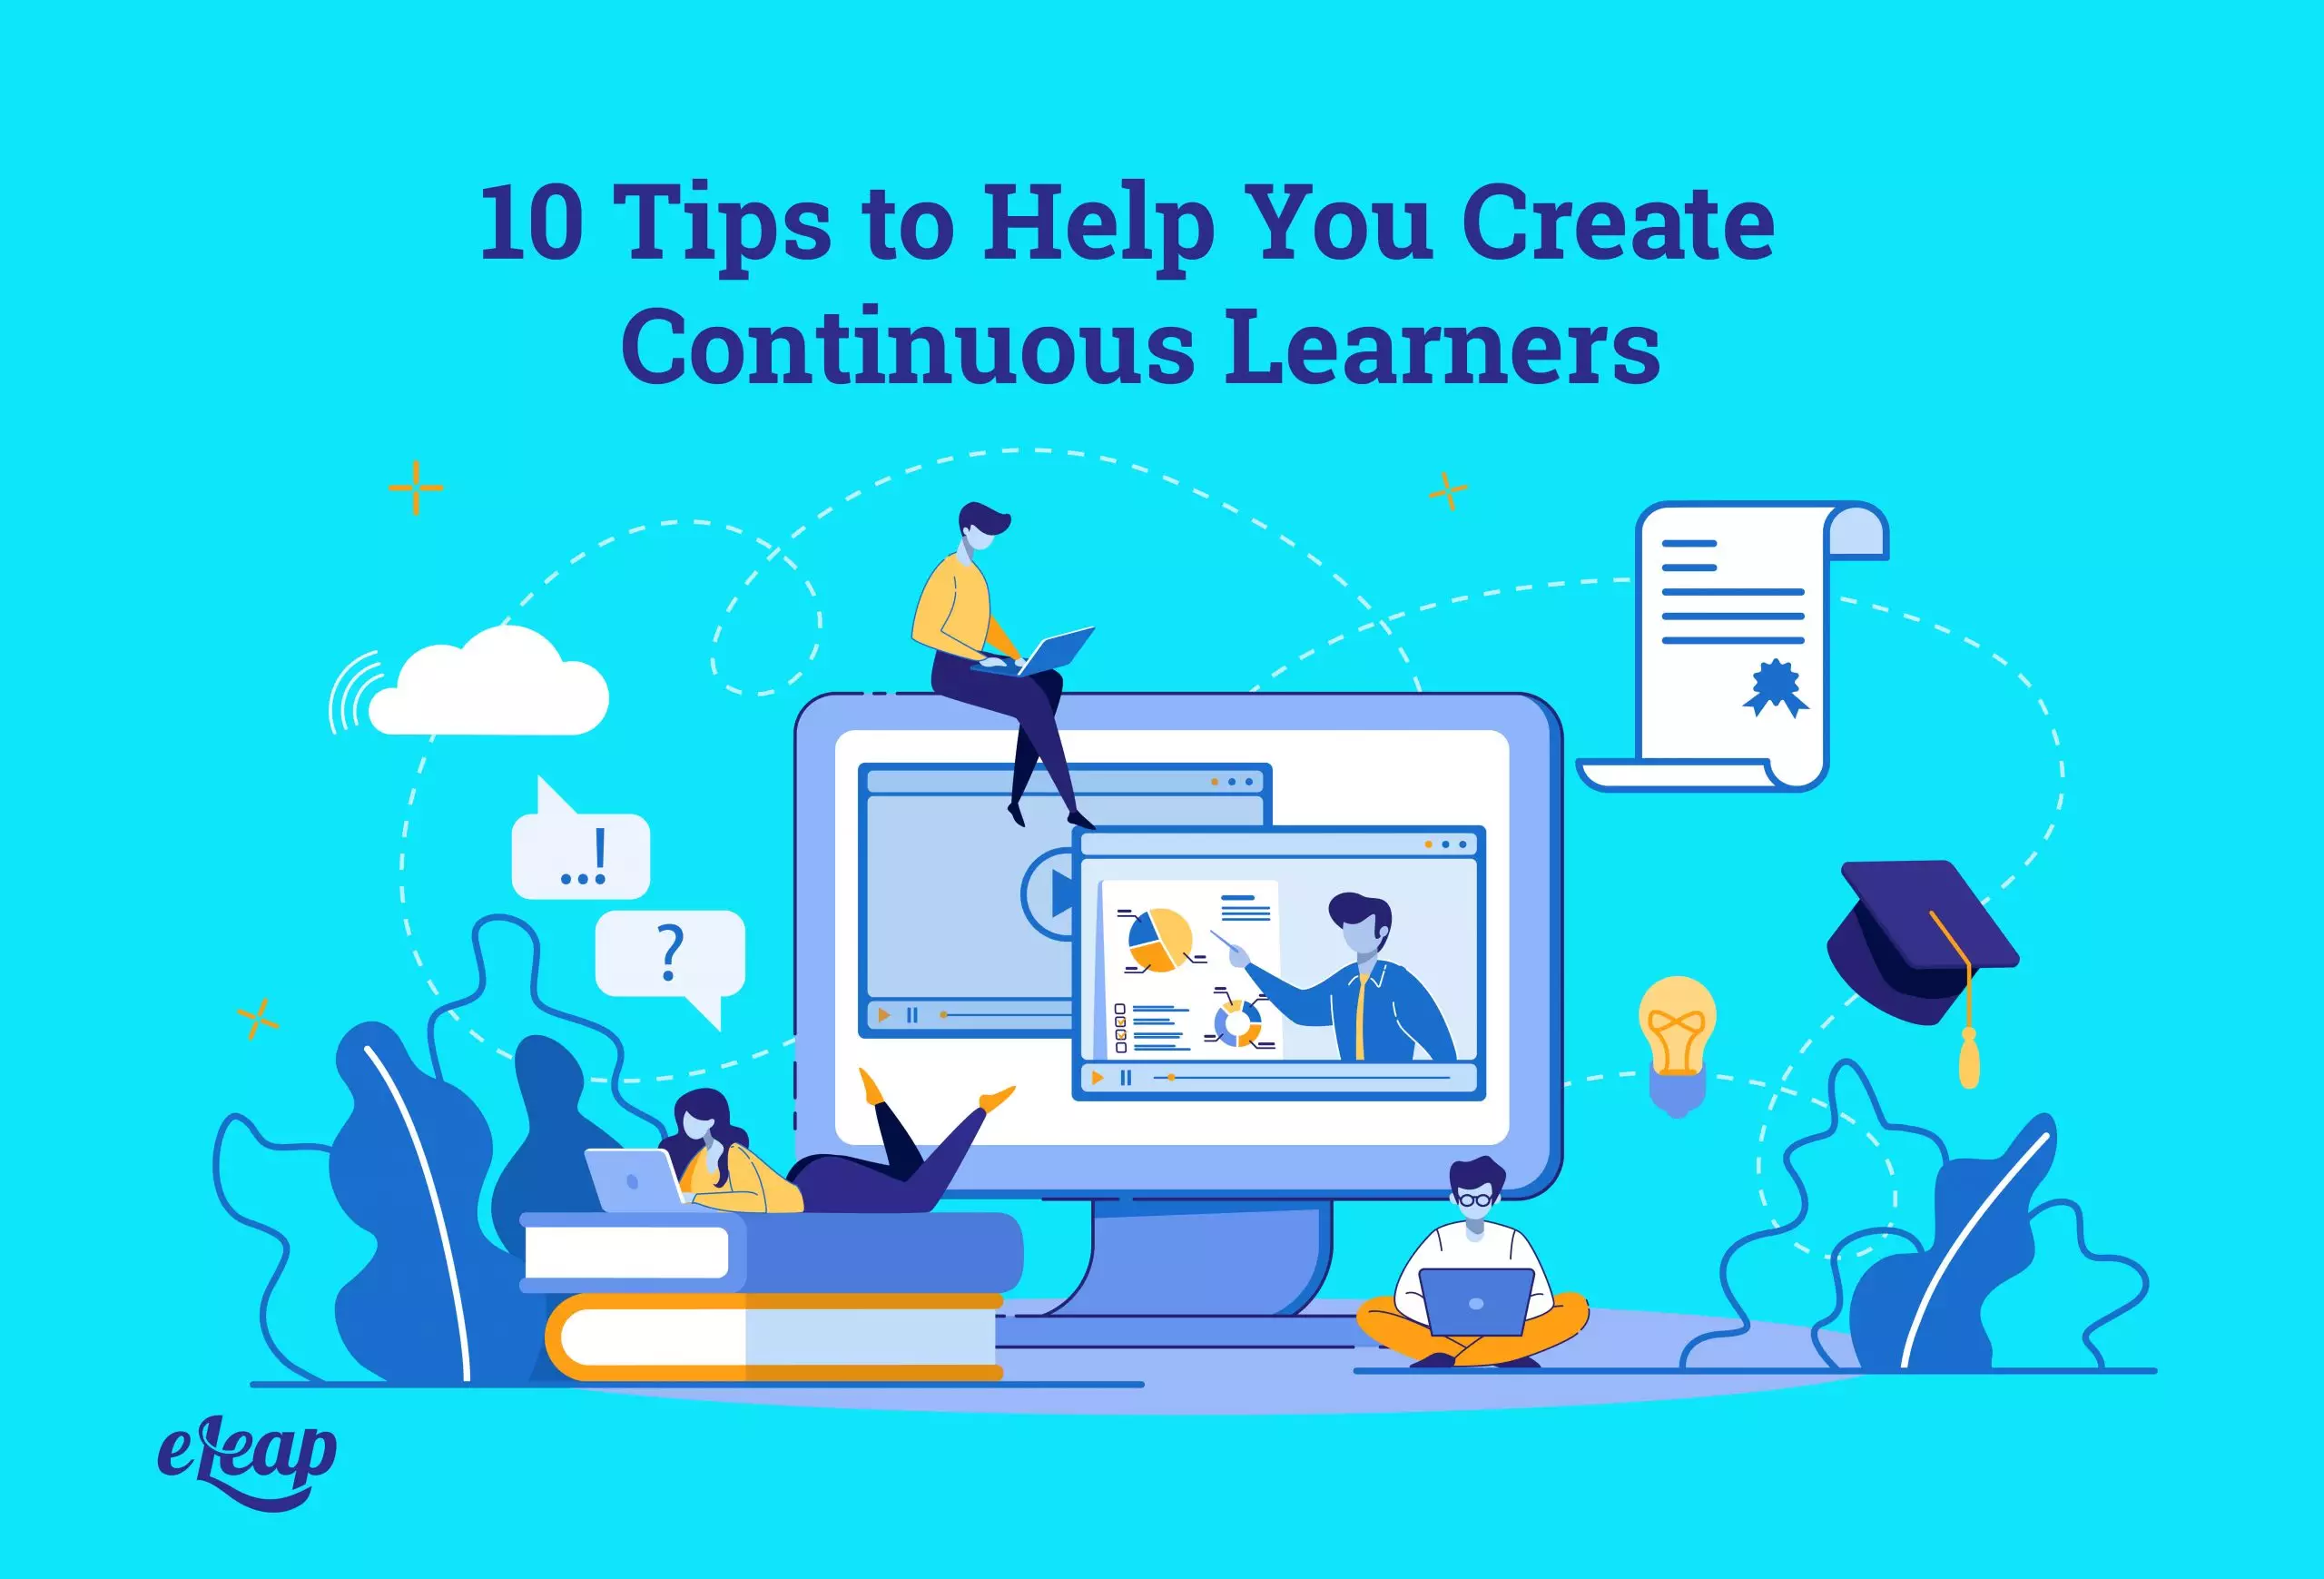 10 Tips to Help You Create Continuous Learners